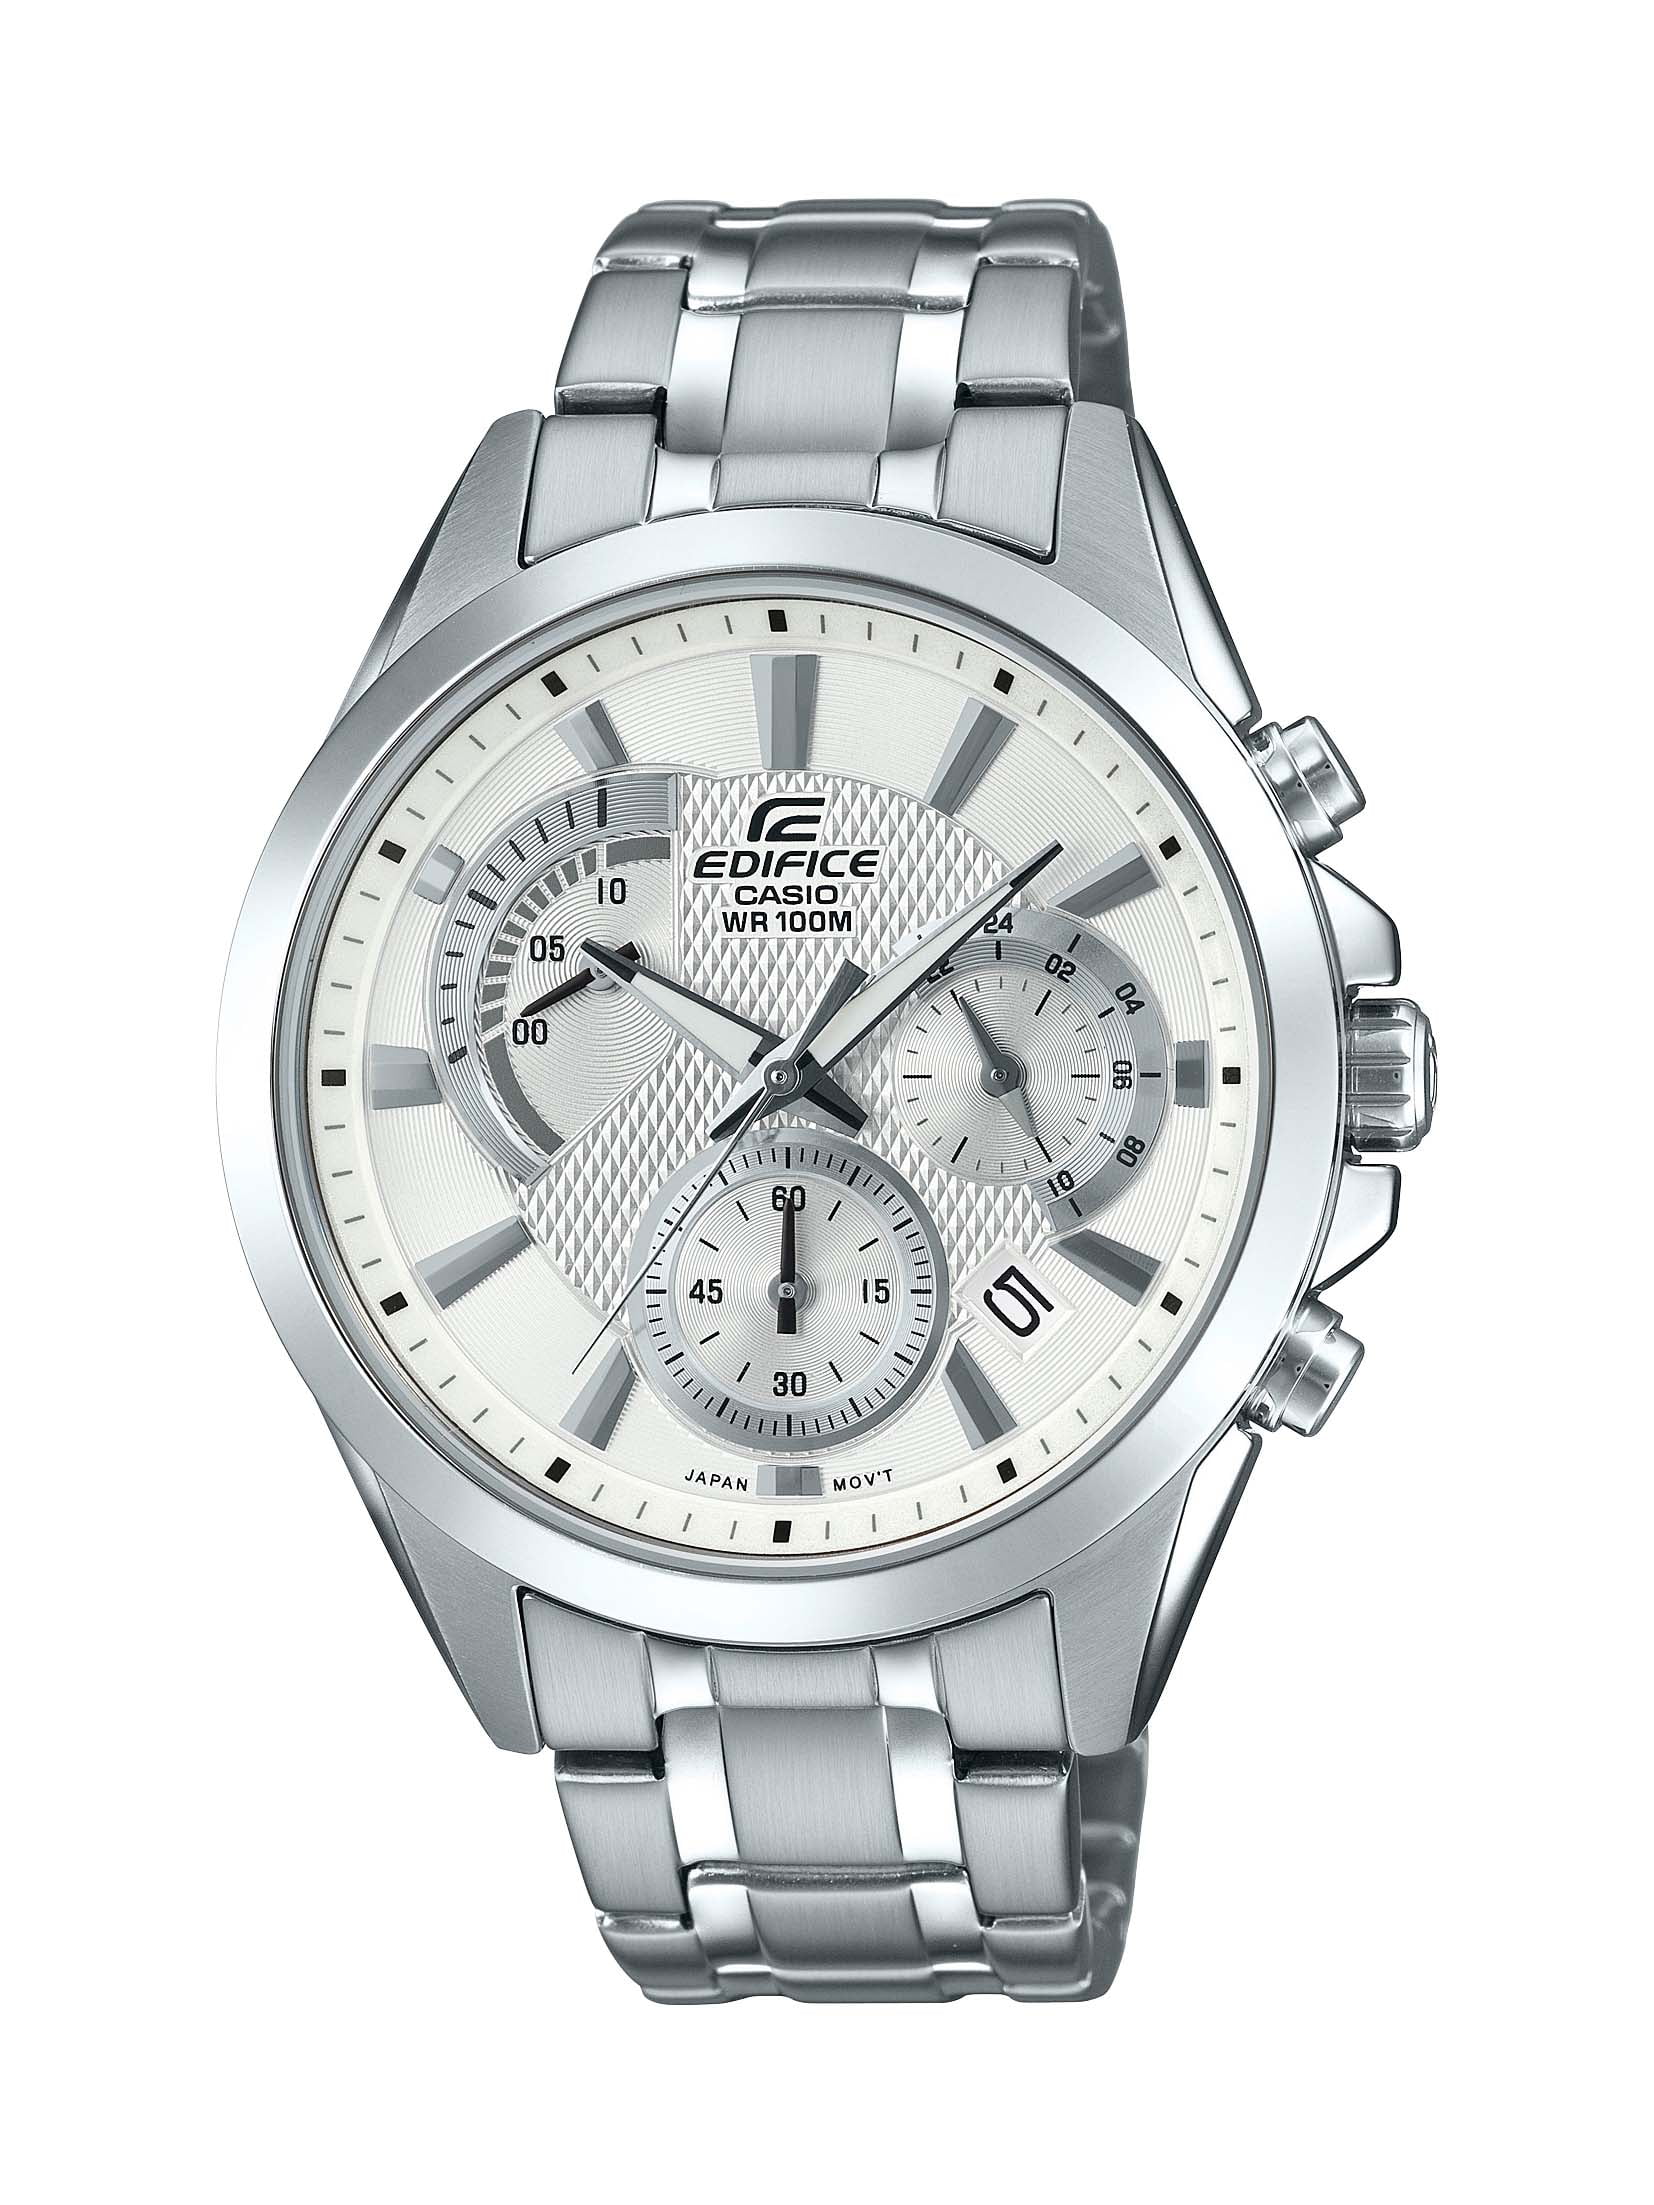 Casio Men's Edifice Stainless Steel Chronograph Watch, Silver Dial EFV-580D-7AVUDF